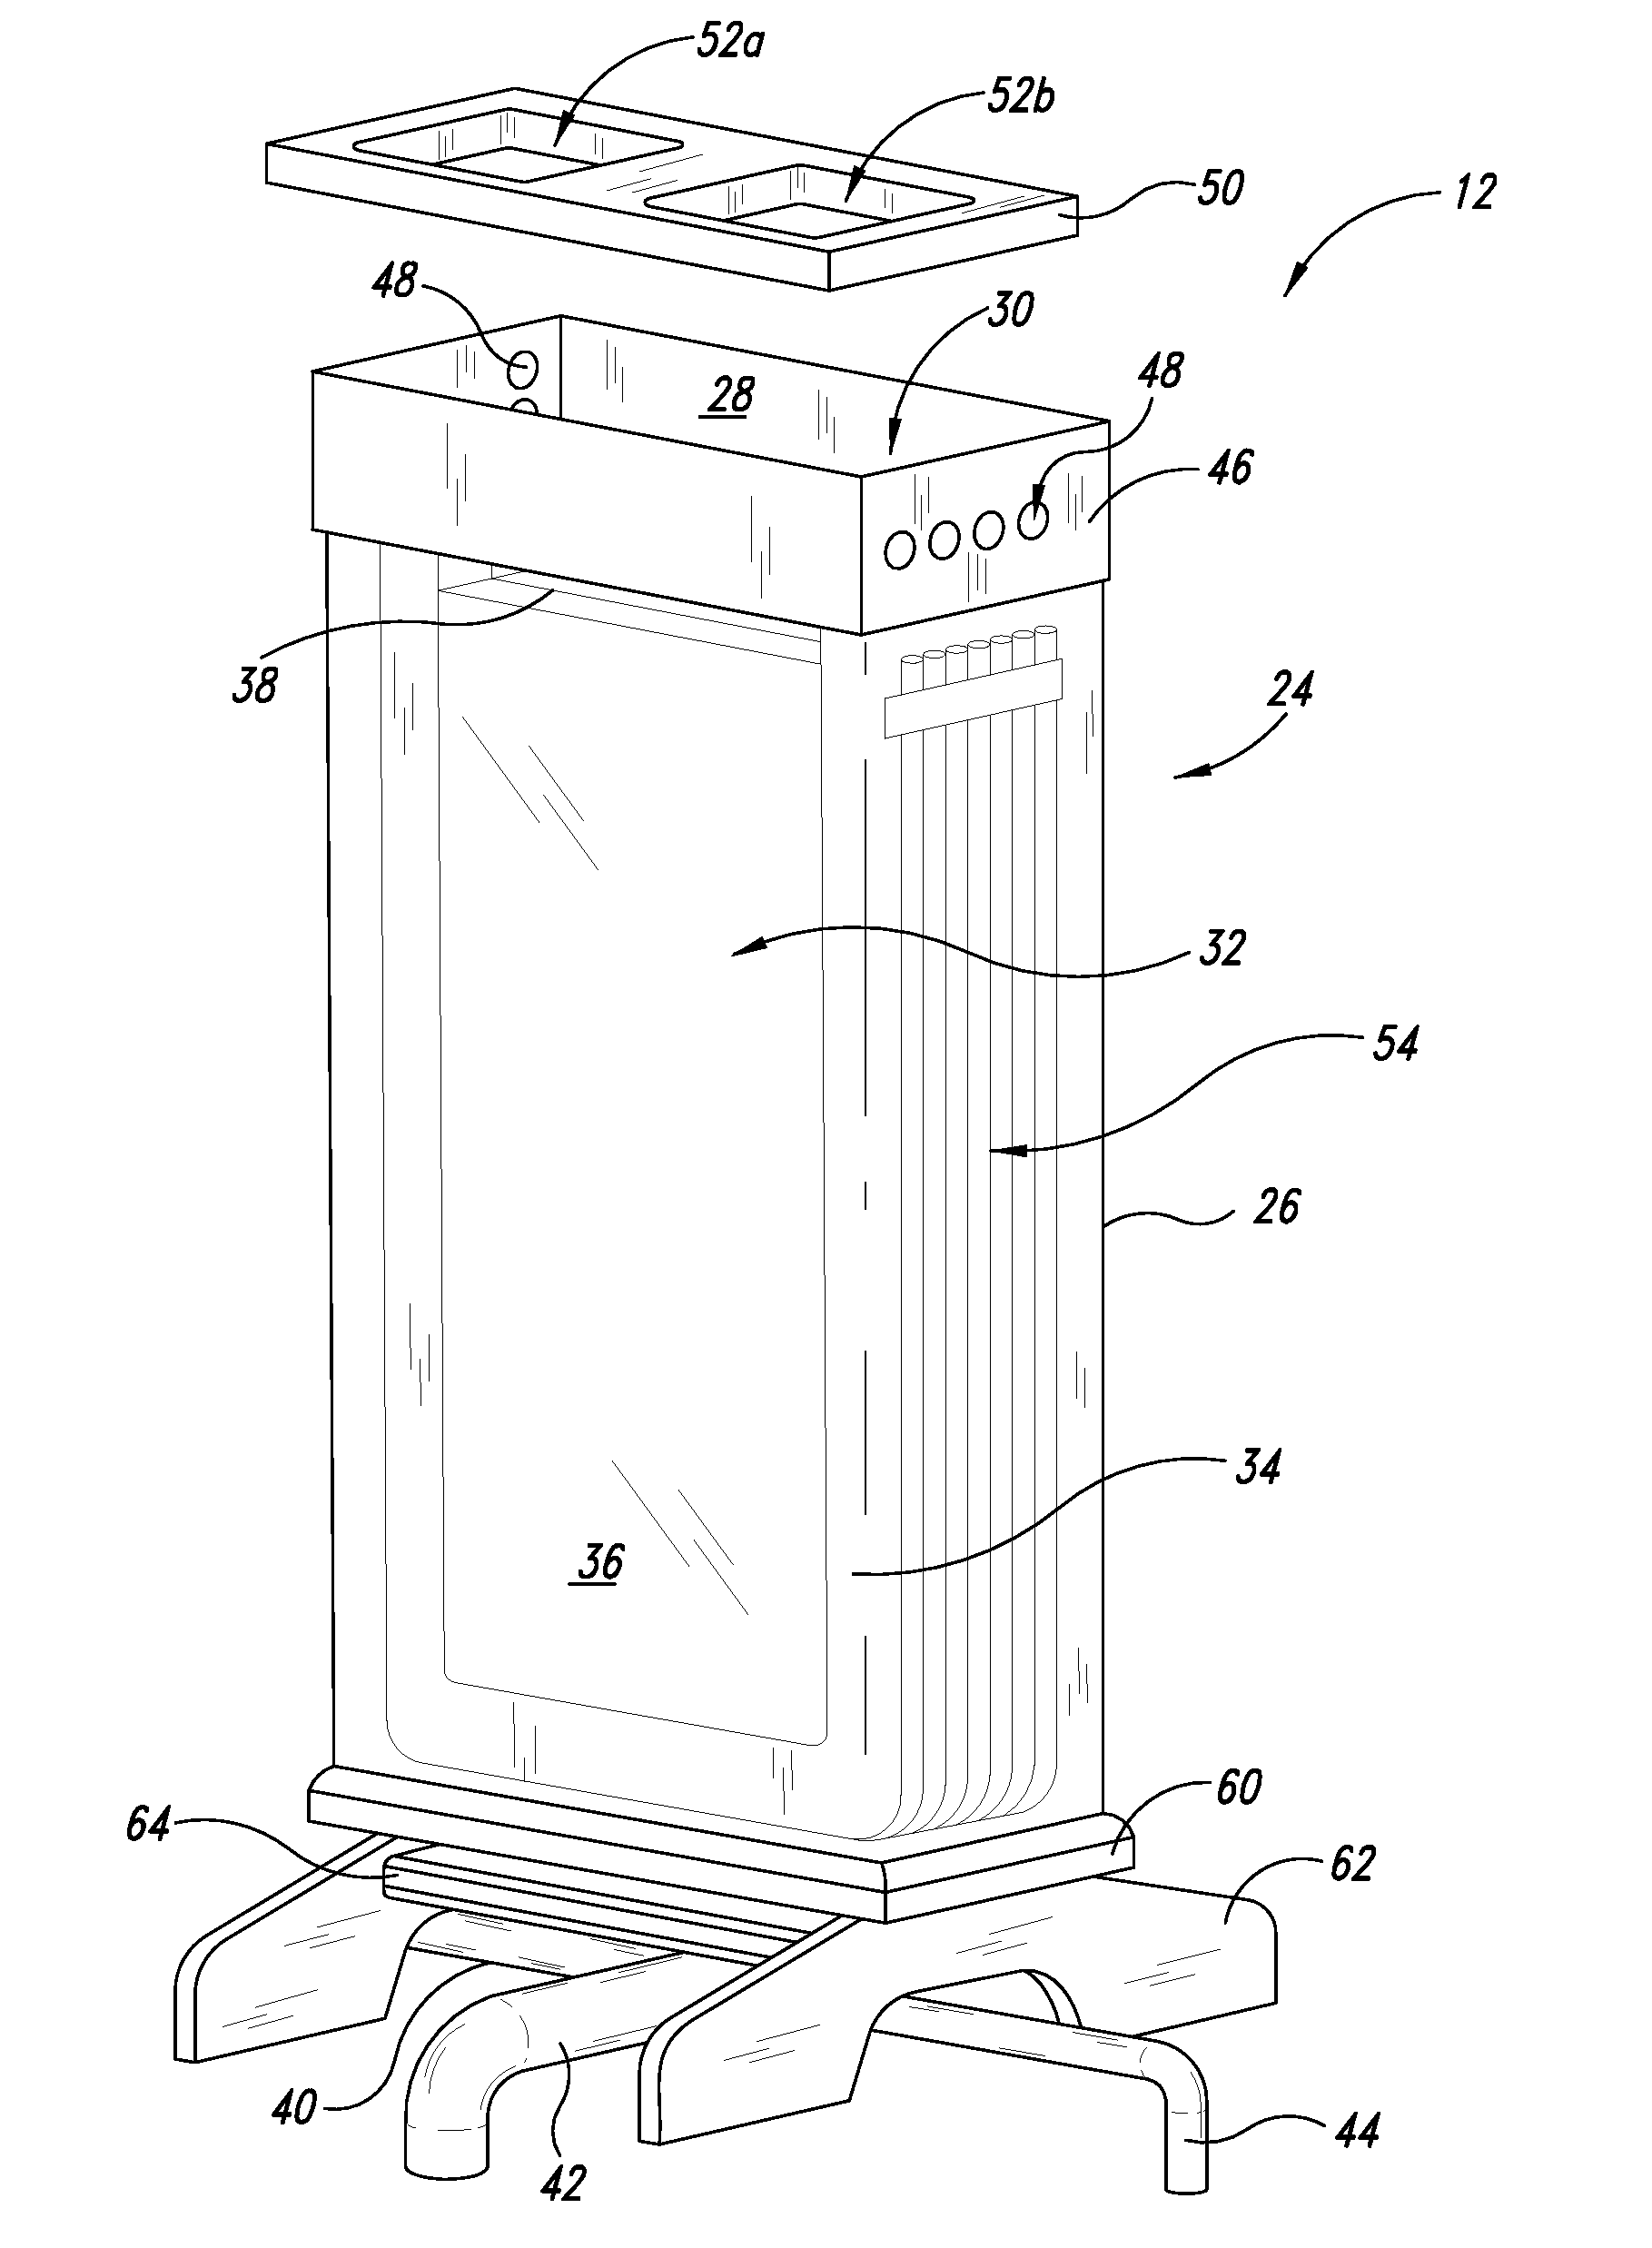 Systems, devices, and, methods for releasing biomass cell components